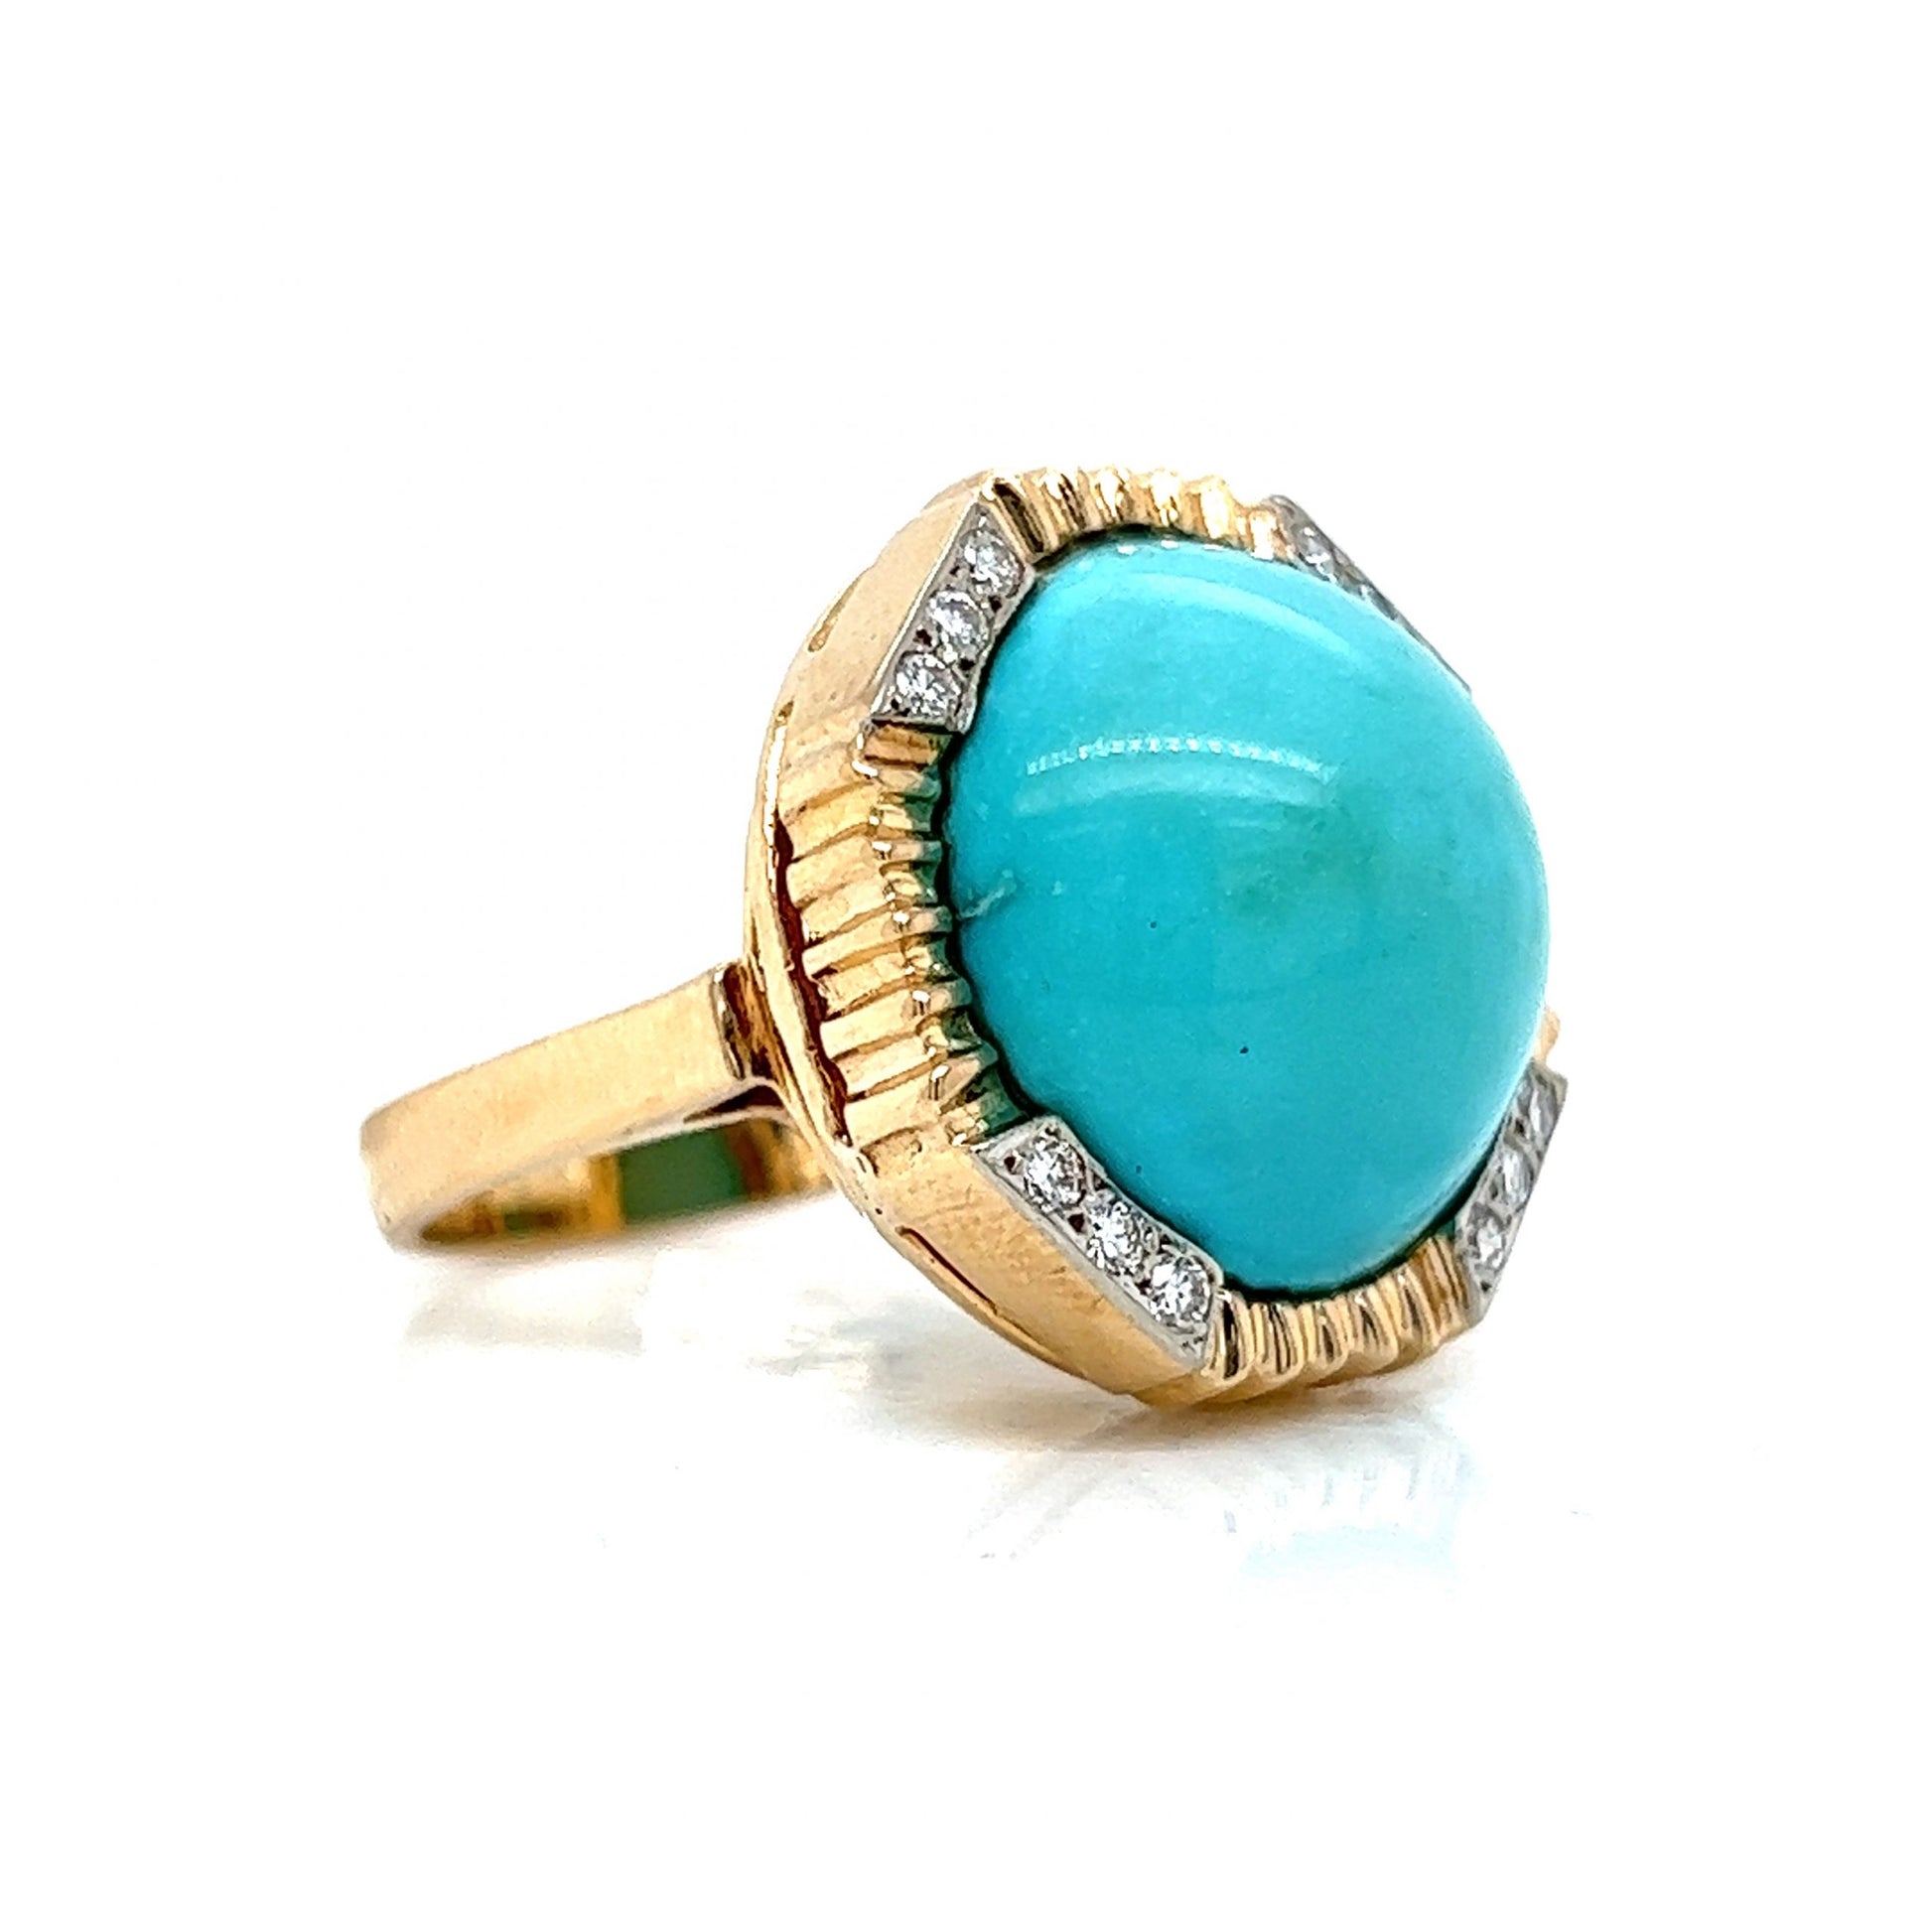 Vintage Round Turquoise & Diamond Ring in 14k Yellow GoldComposition: 14 Karat Yellow Gold Ring Size: 6.5 Total Diamond Weight: .24ct Total Gram Weight: 8.8 g Inscription: 14k
      